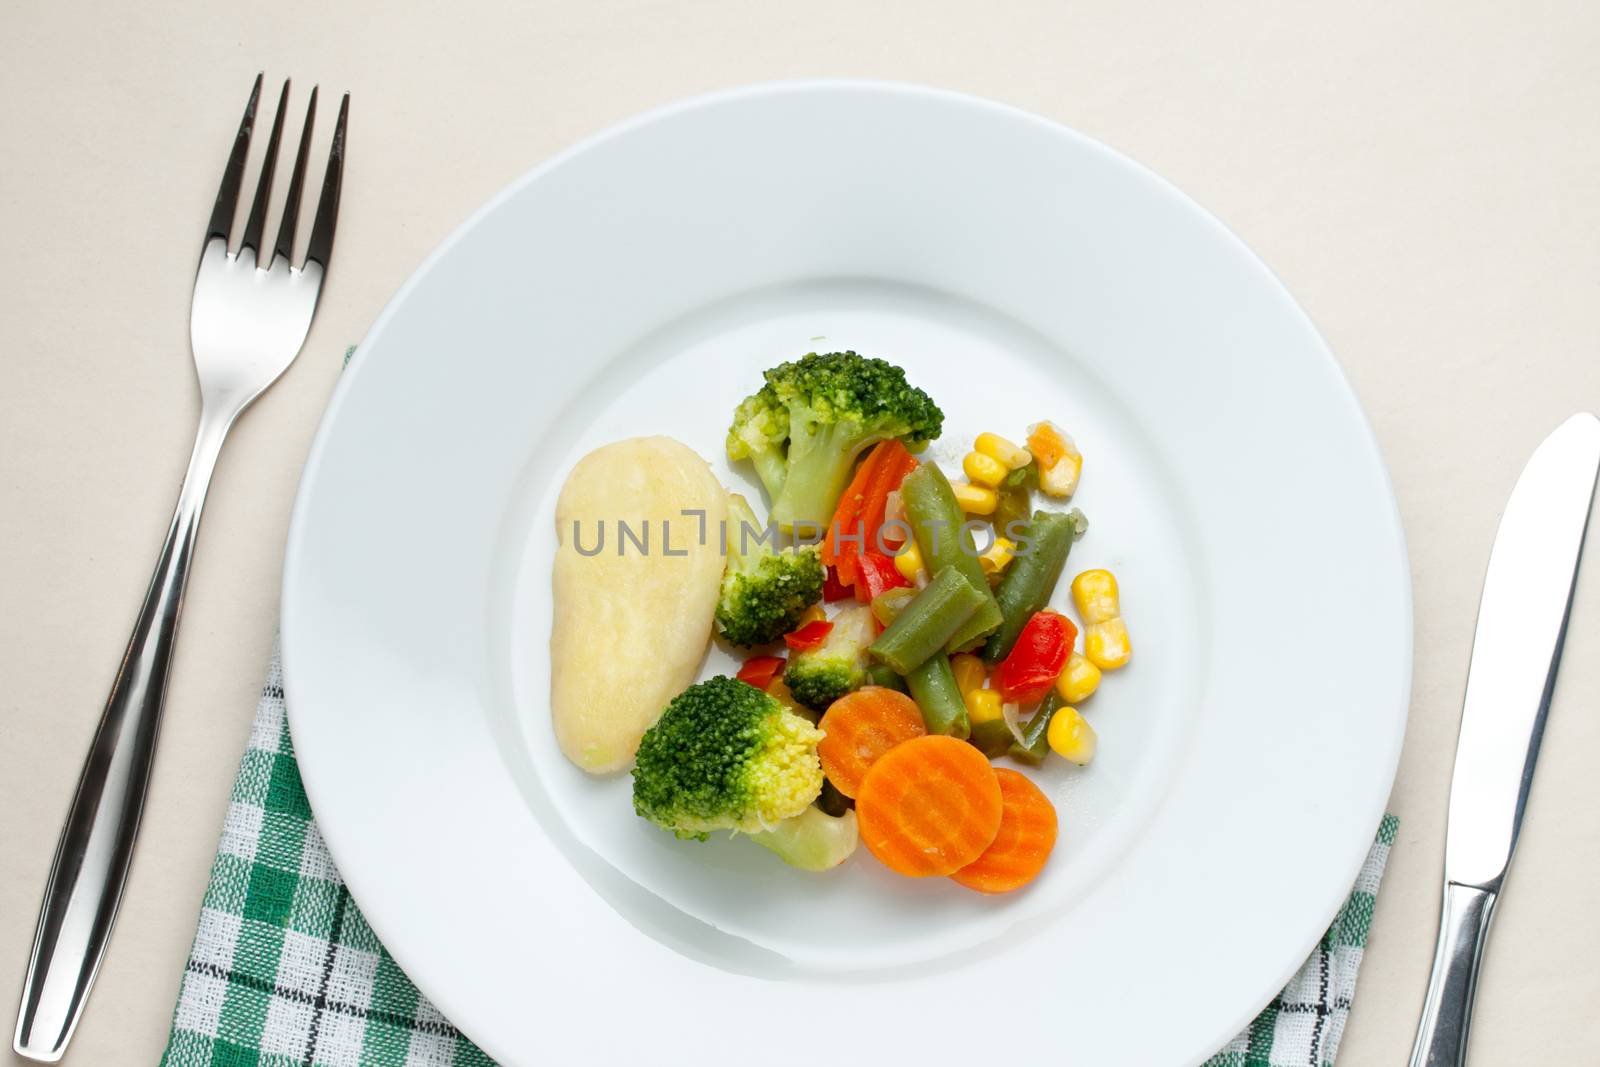 Fried vegetables on the plate